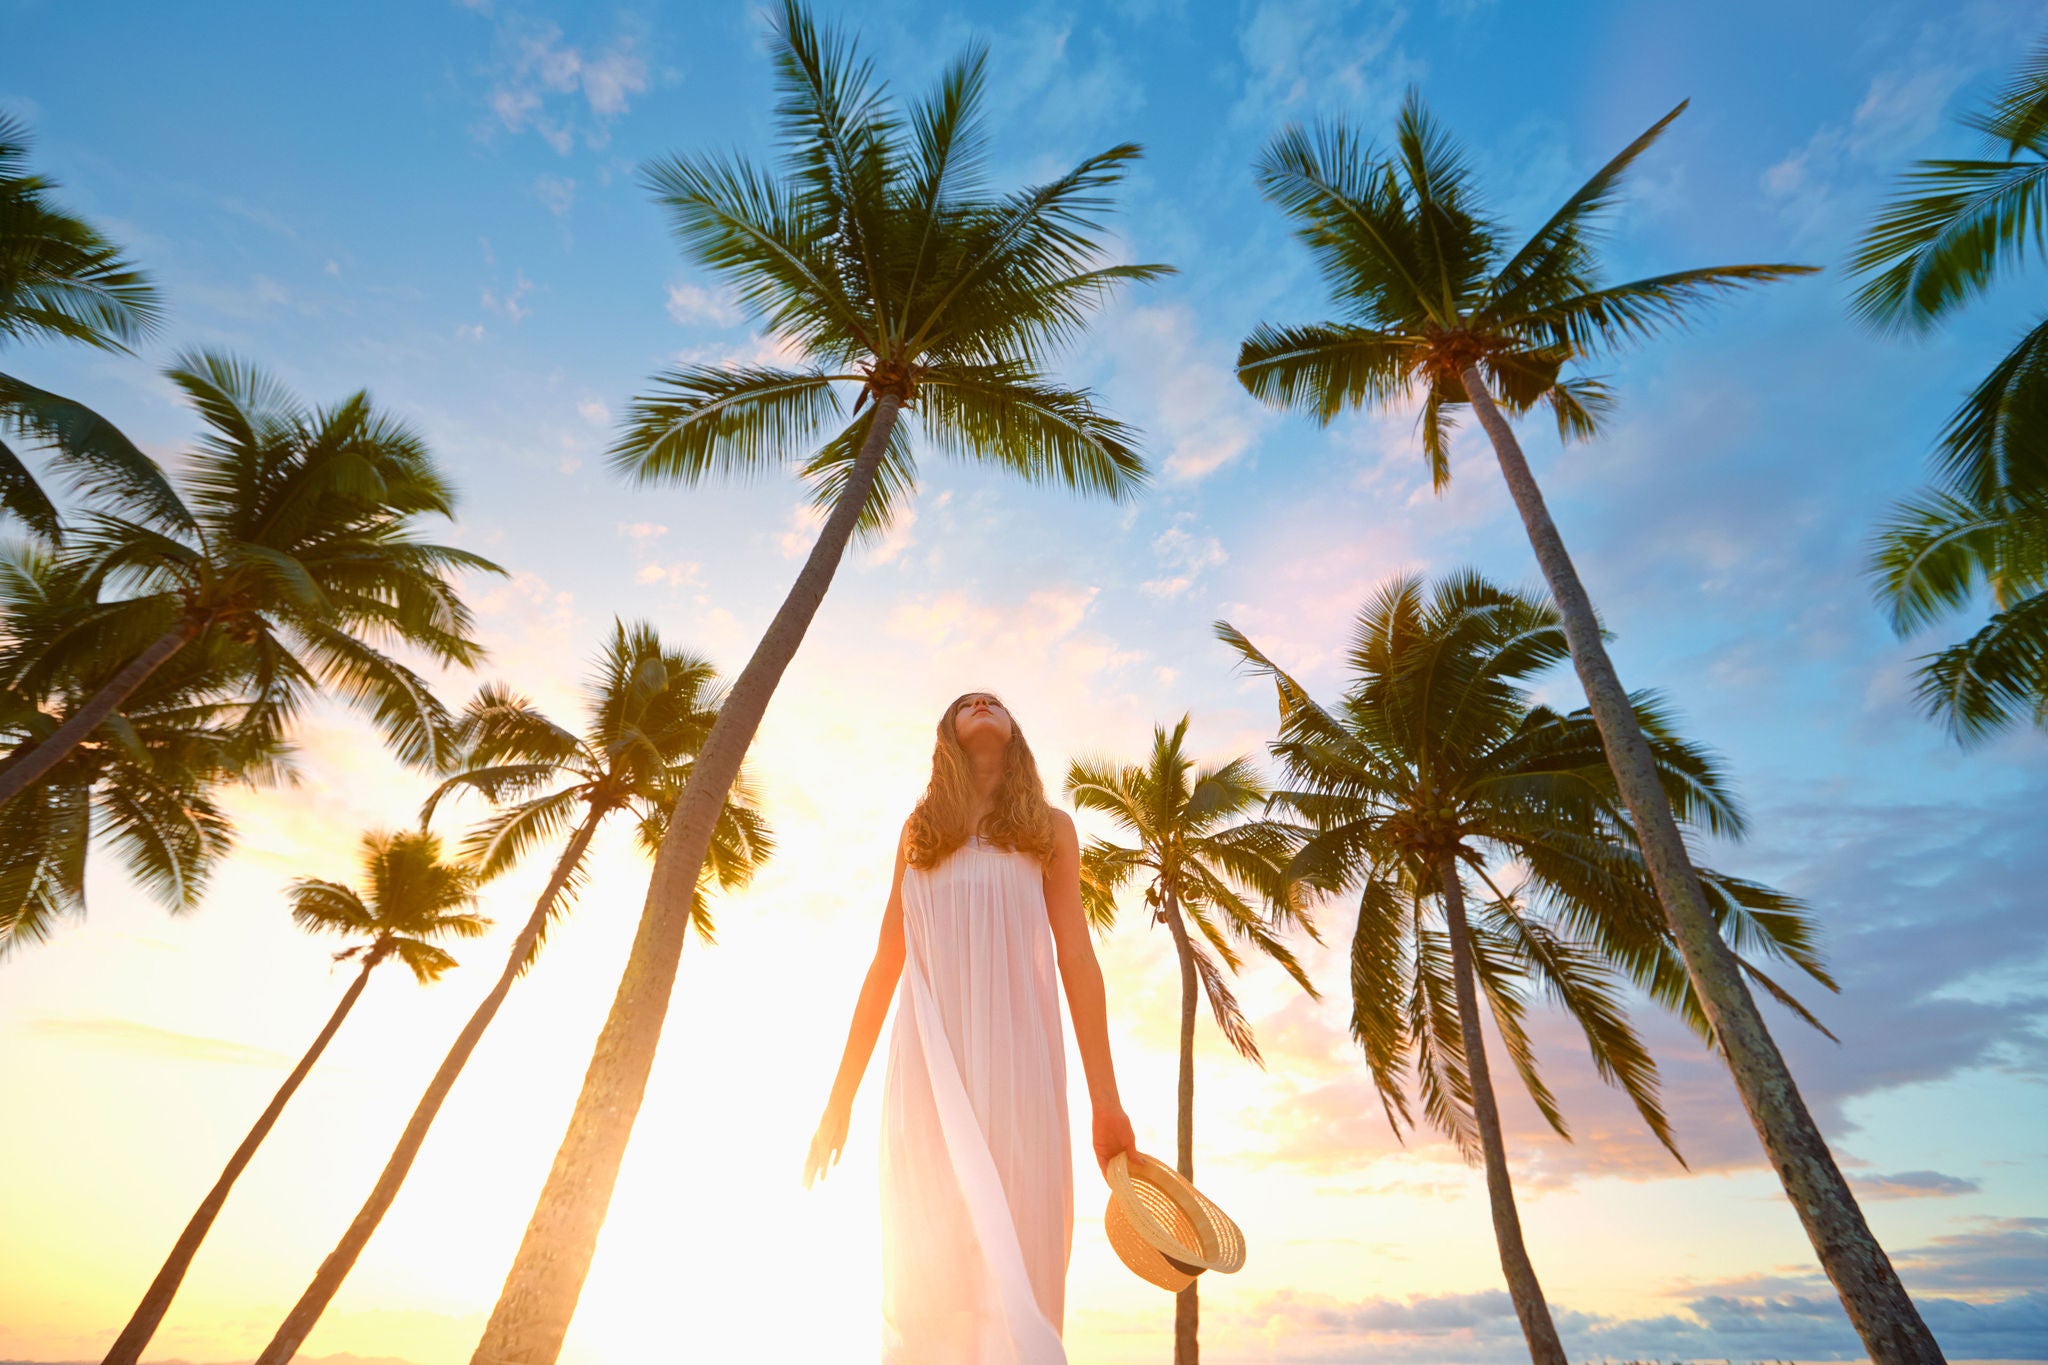 lady wearing white walking by palm trees